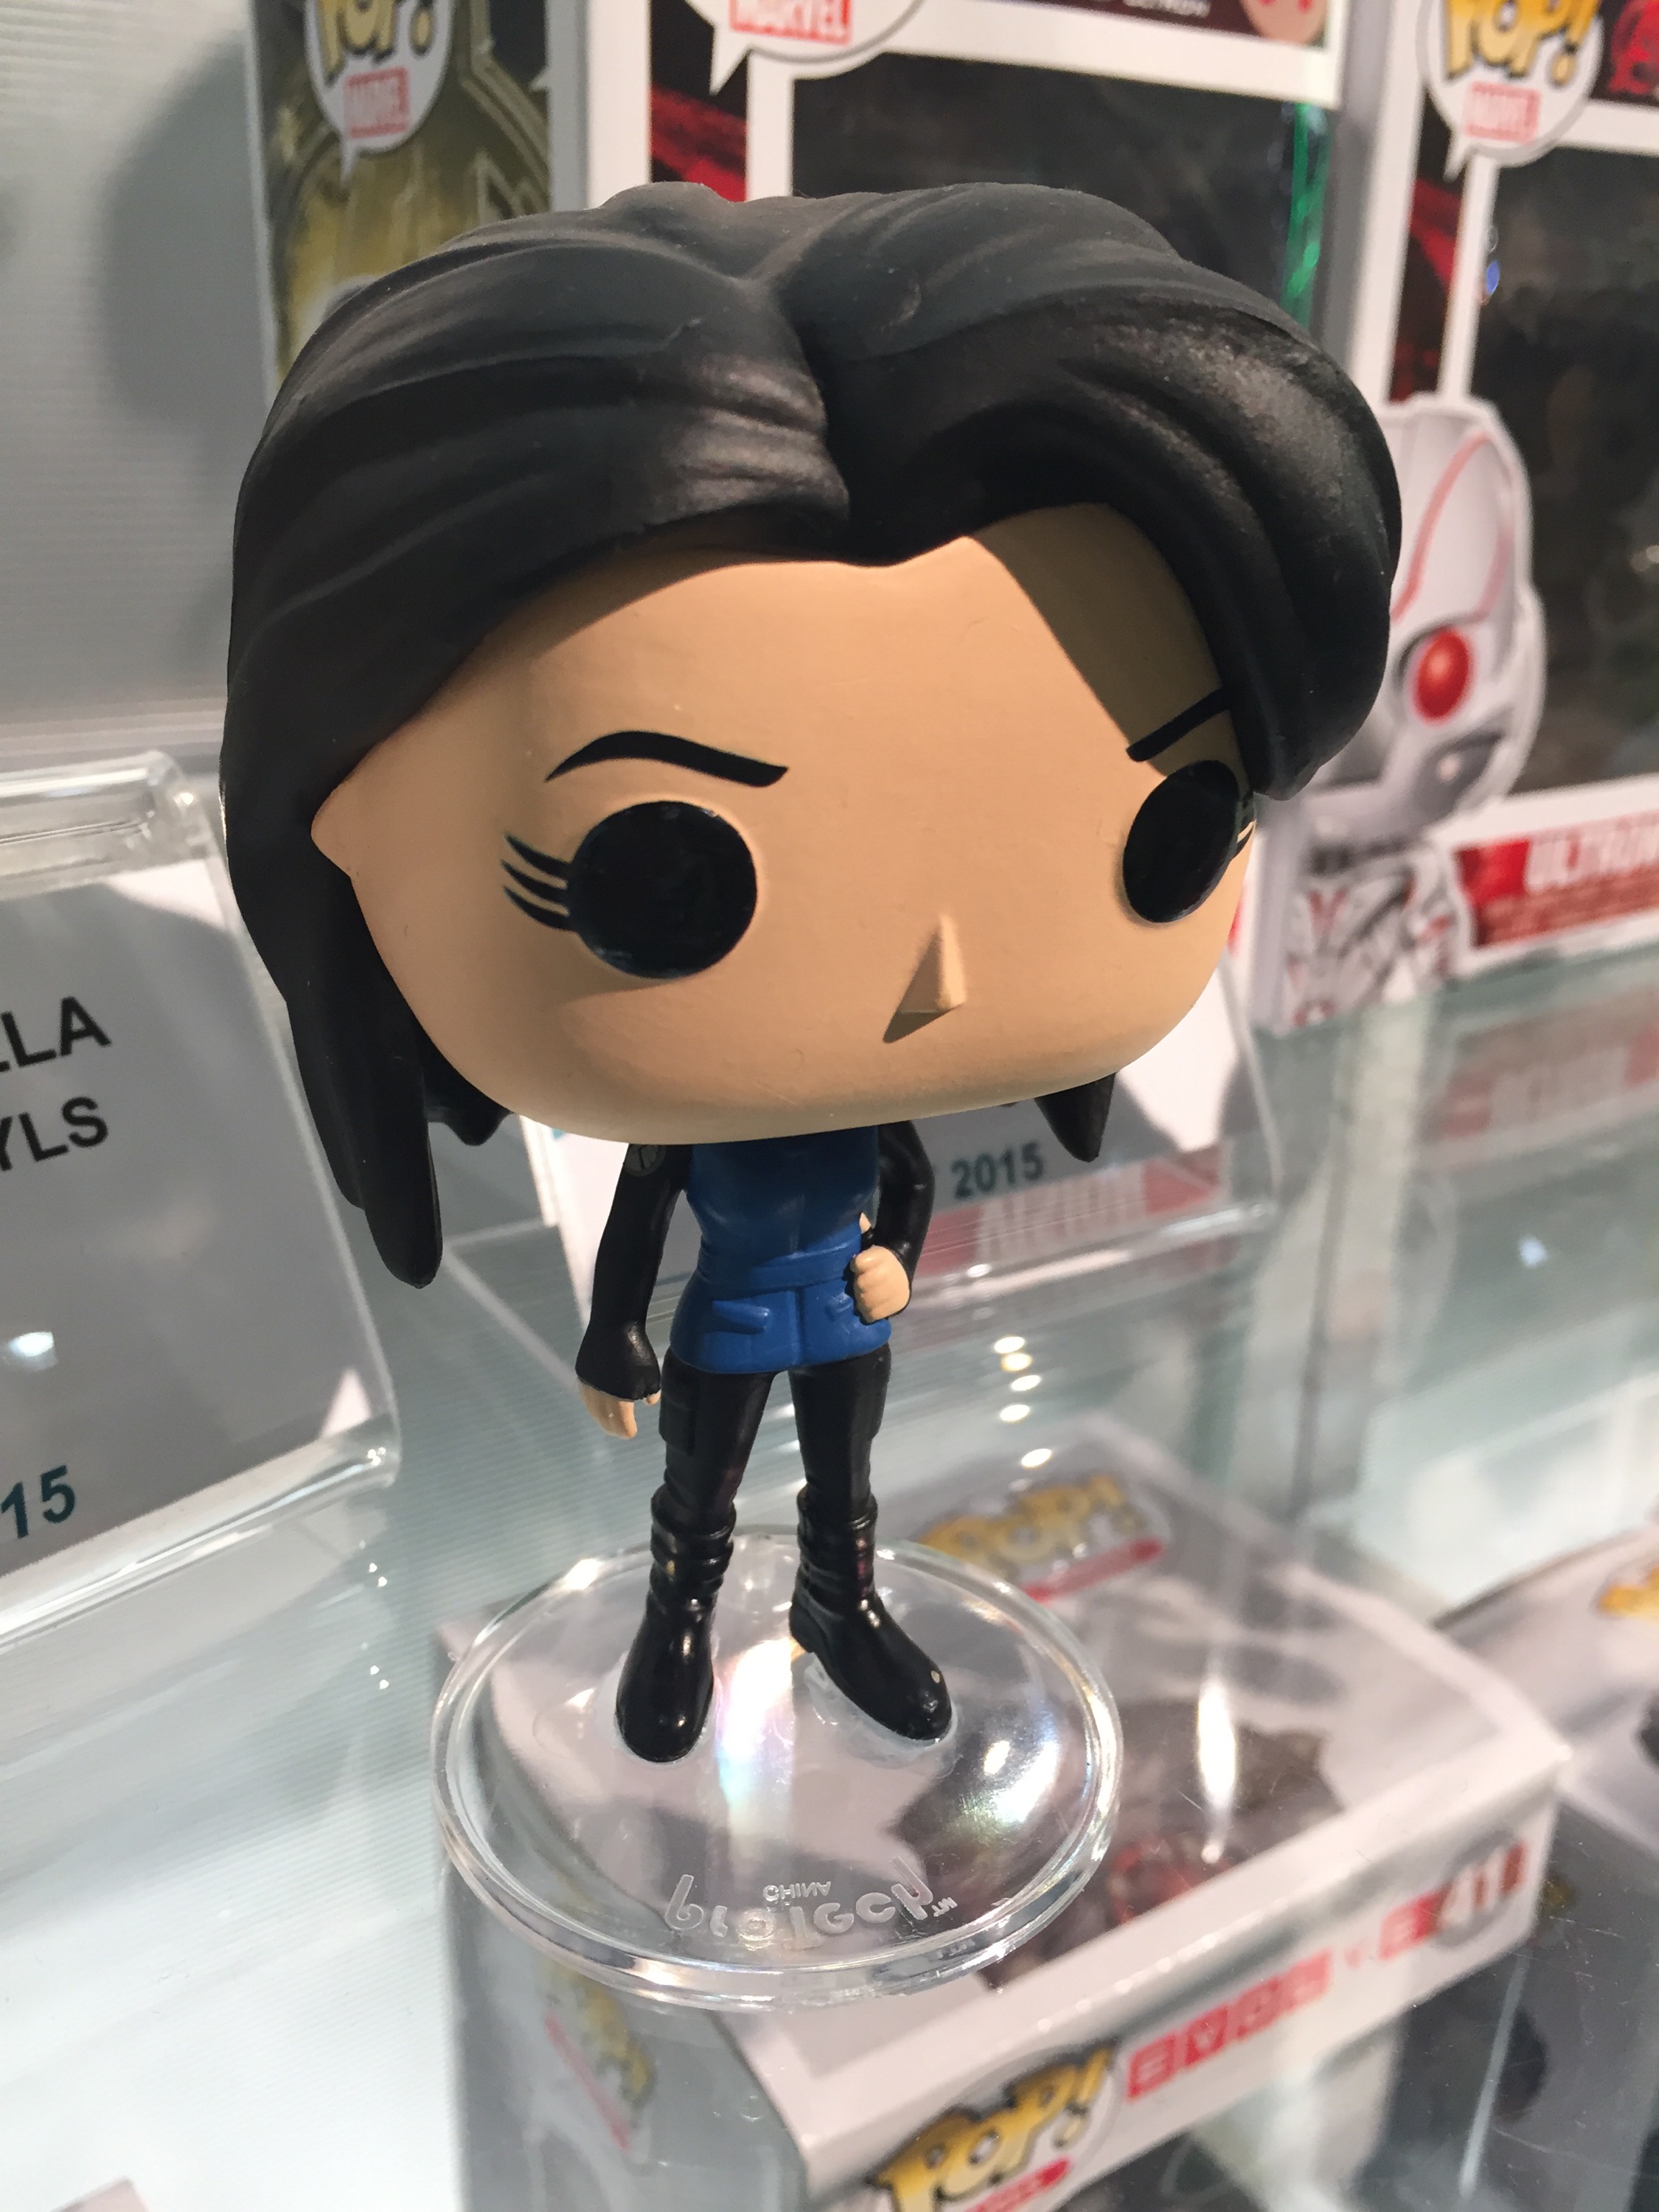 Merchandisers are pretty wary of Agents of S.H.I.E.L.D., so this Agent Meli...